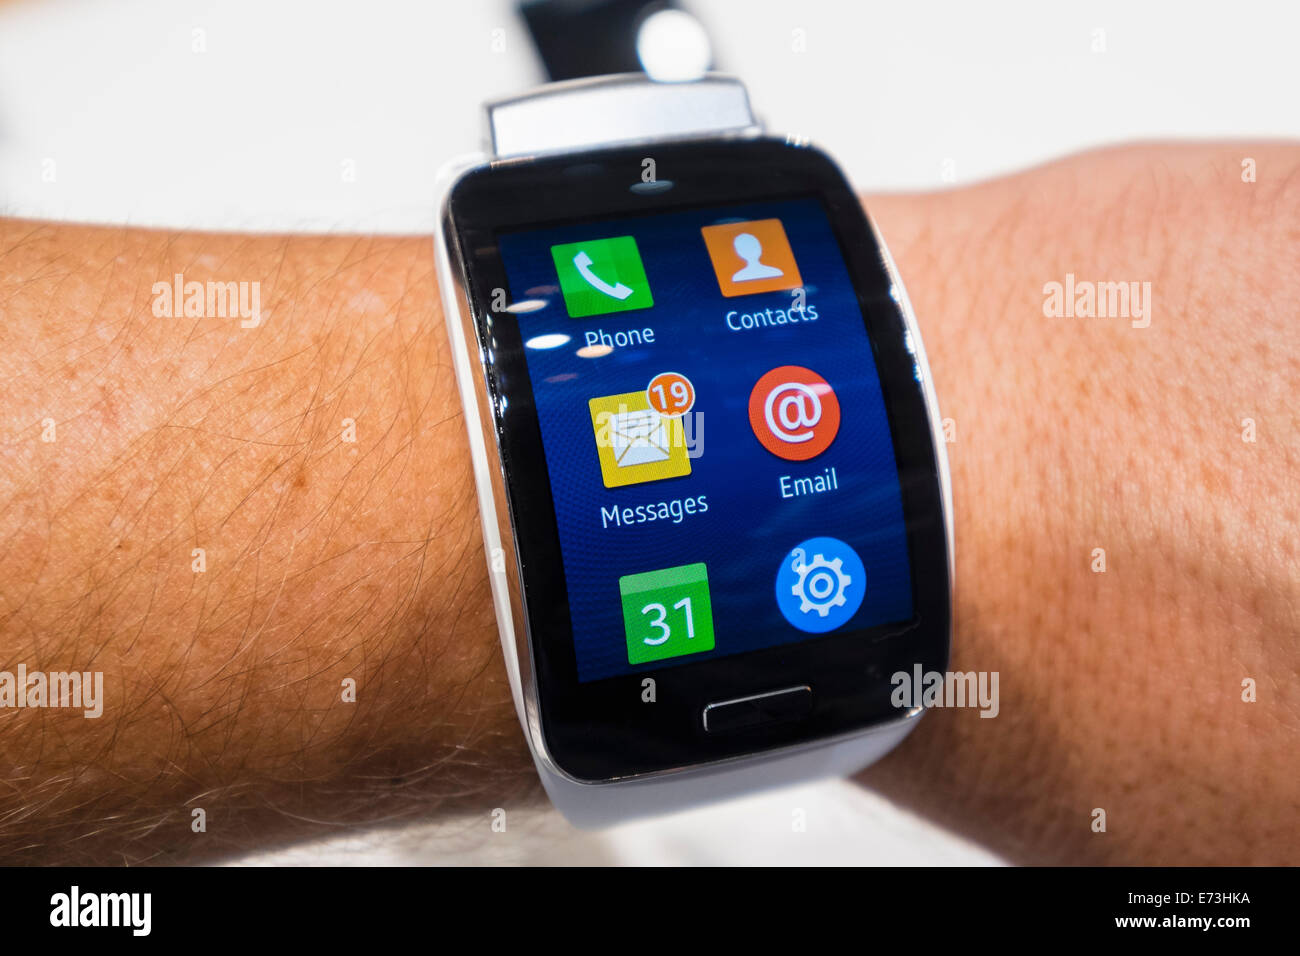 Berlin, Germany. 5th September, 2014. Samsung Gear S smart watch on display  at IFA 2014 consumer electronics show in Berlin Germany Credit: Iain  Masterton/Alamy Live News Stock Photo - Alamy